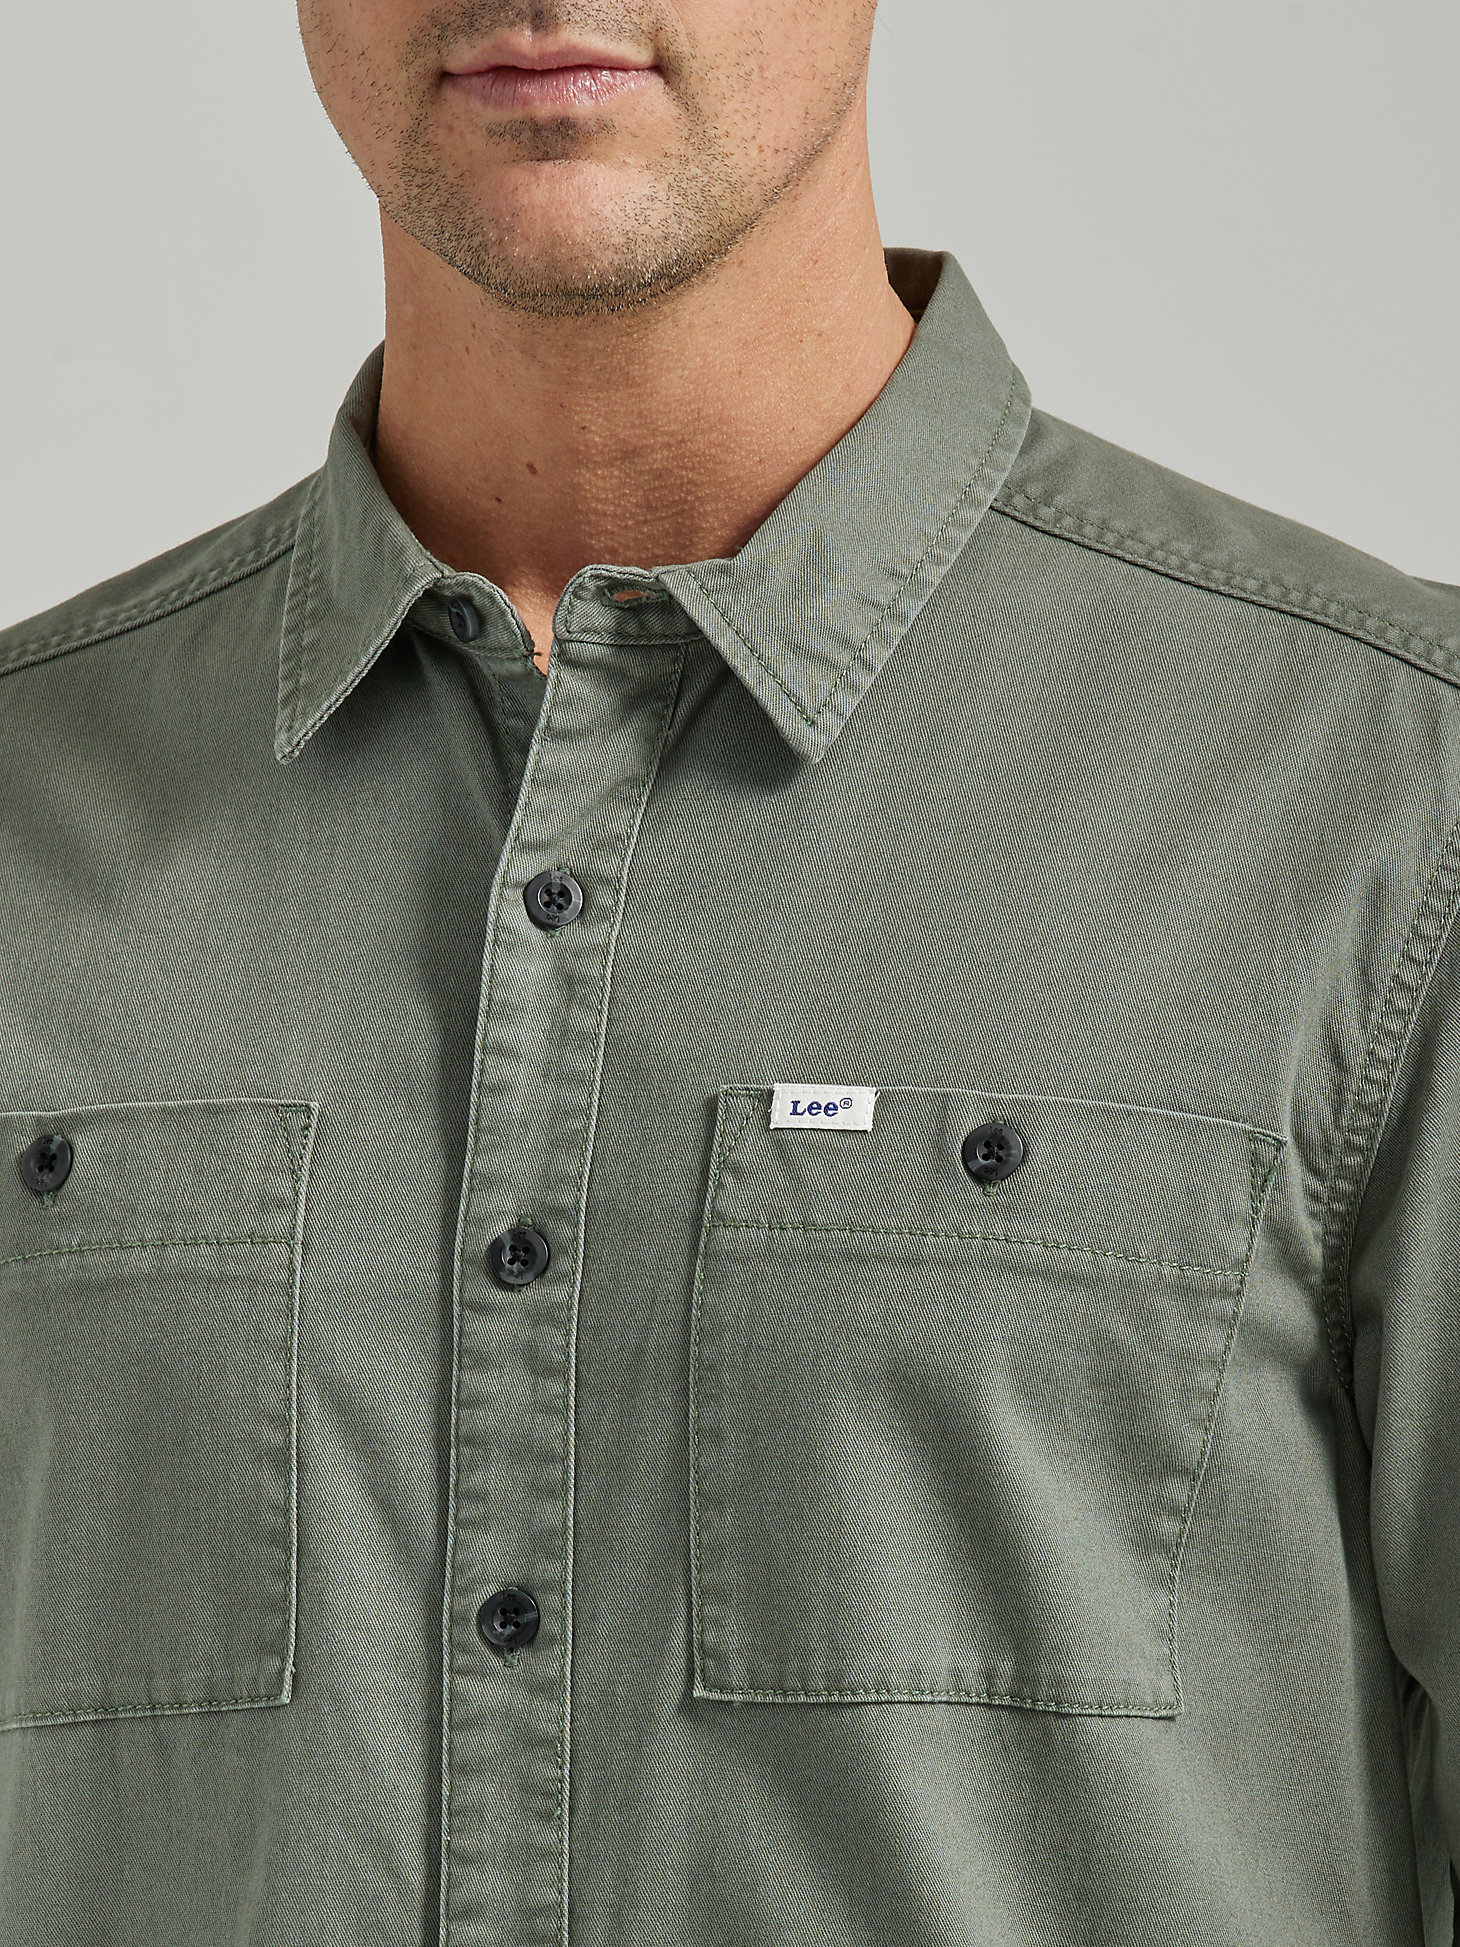 Men's Workwear Solid Overshirt in Fort Green alternative view 2